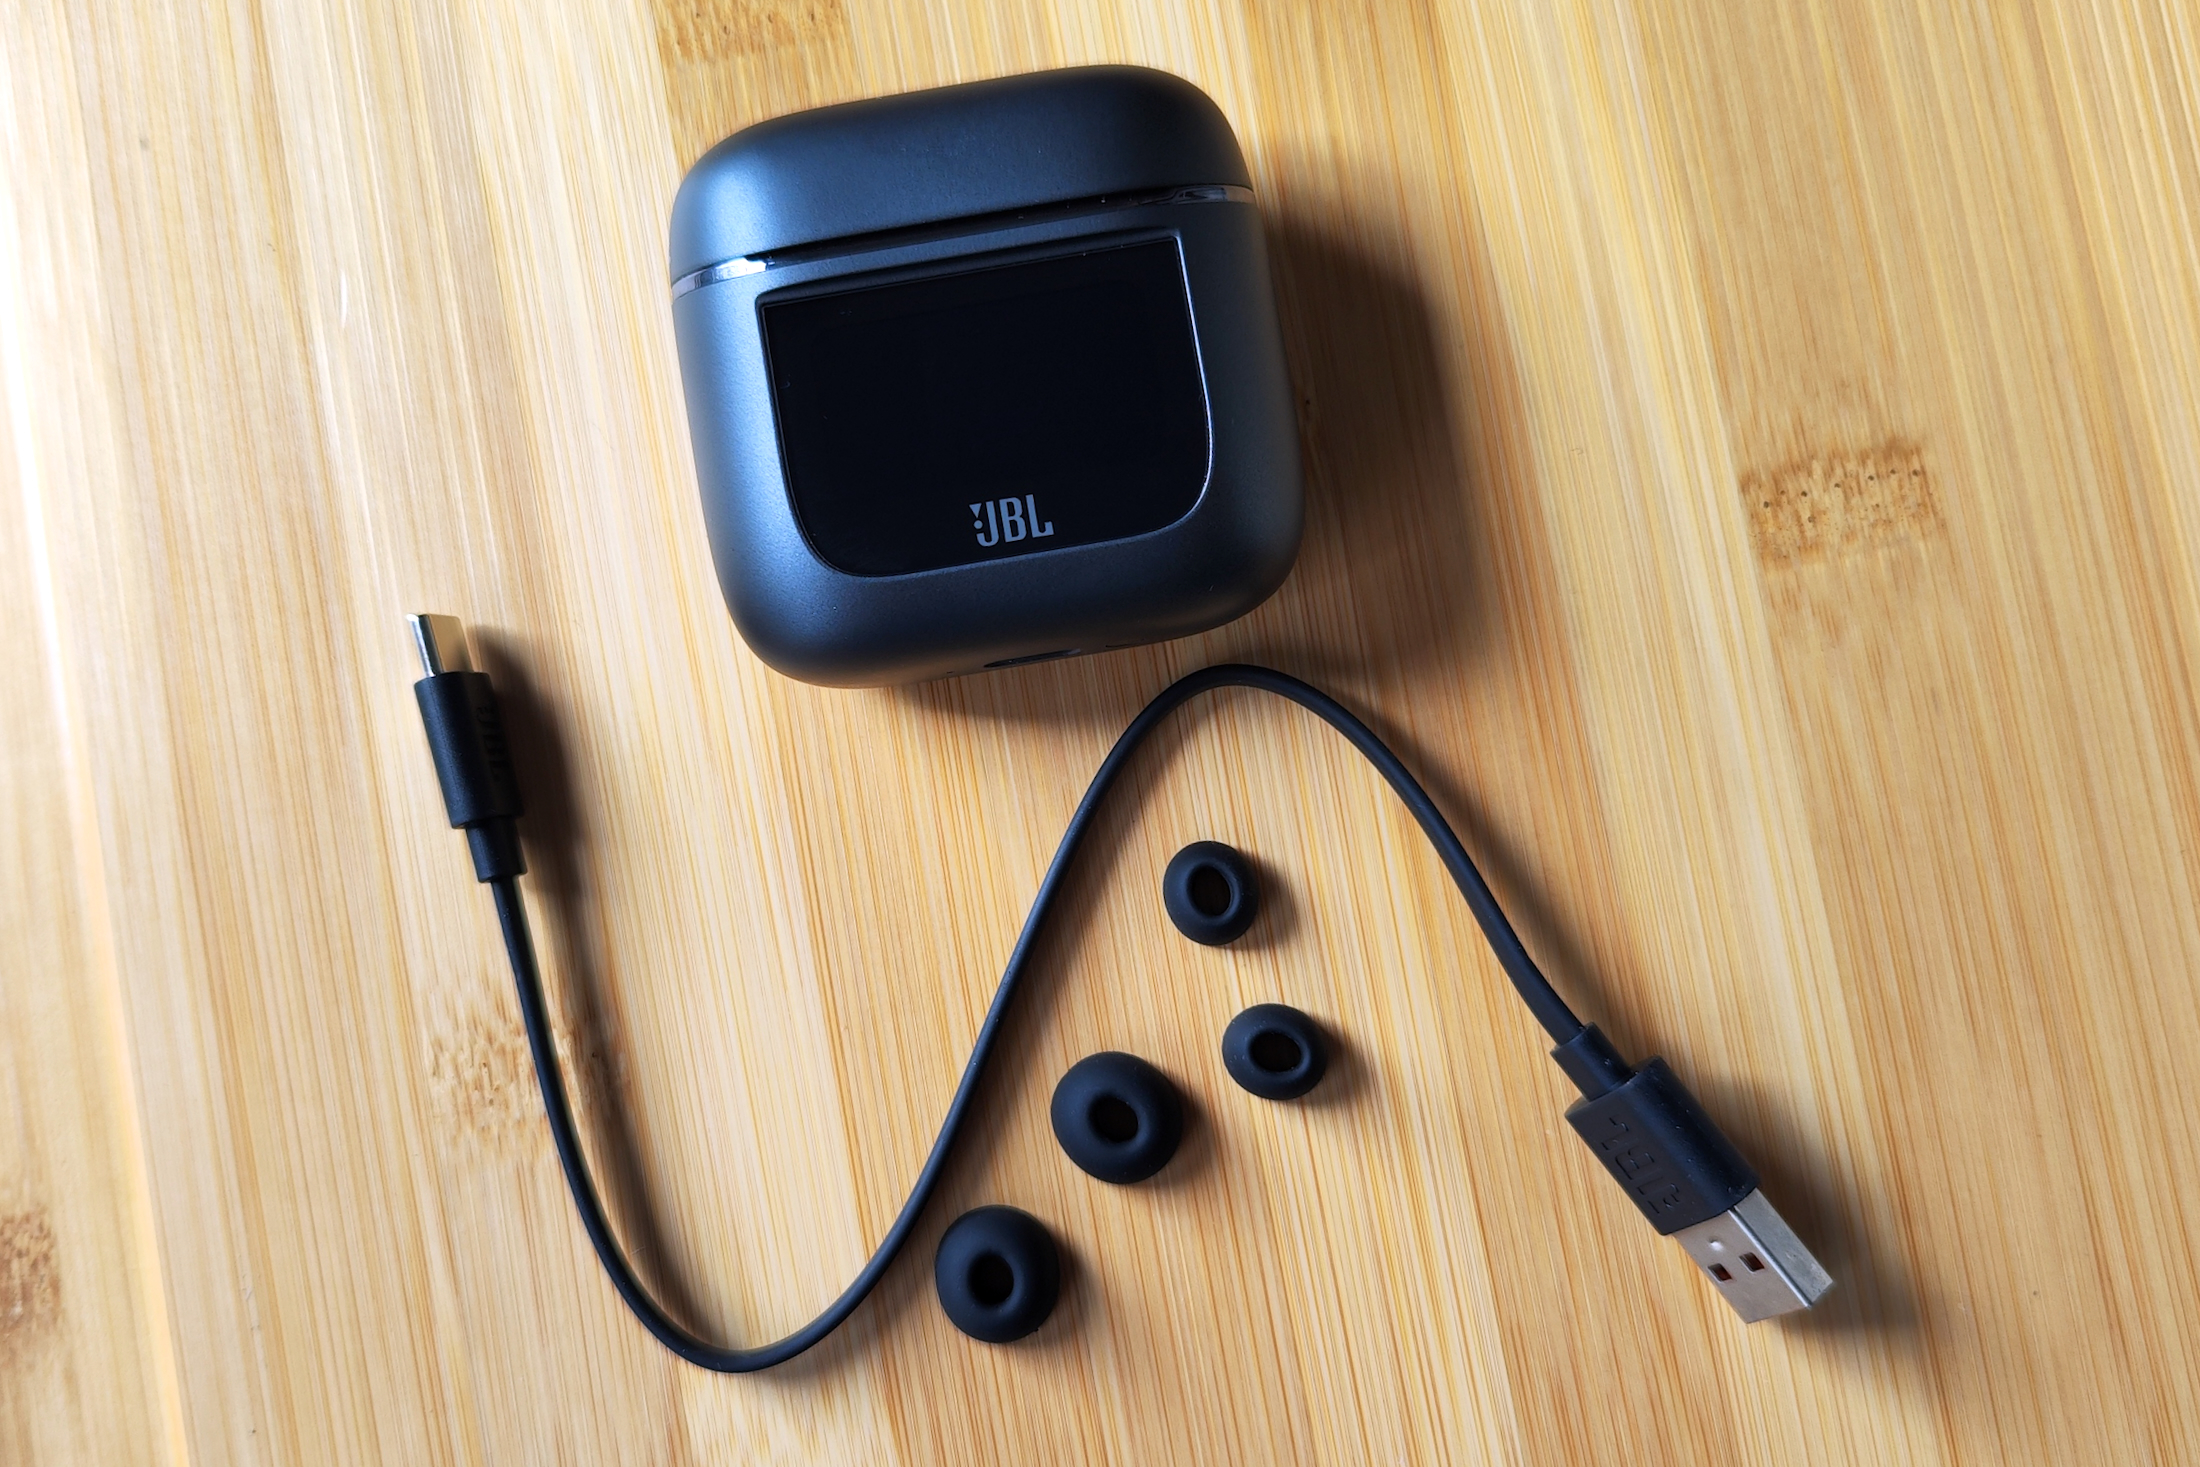 JBL Tour Pro 2 review: These earbuds have a touchscreen